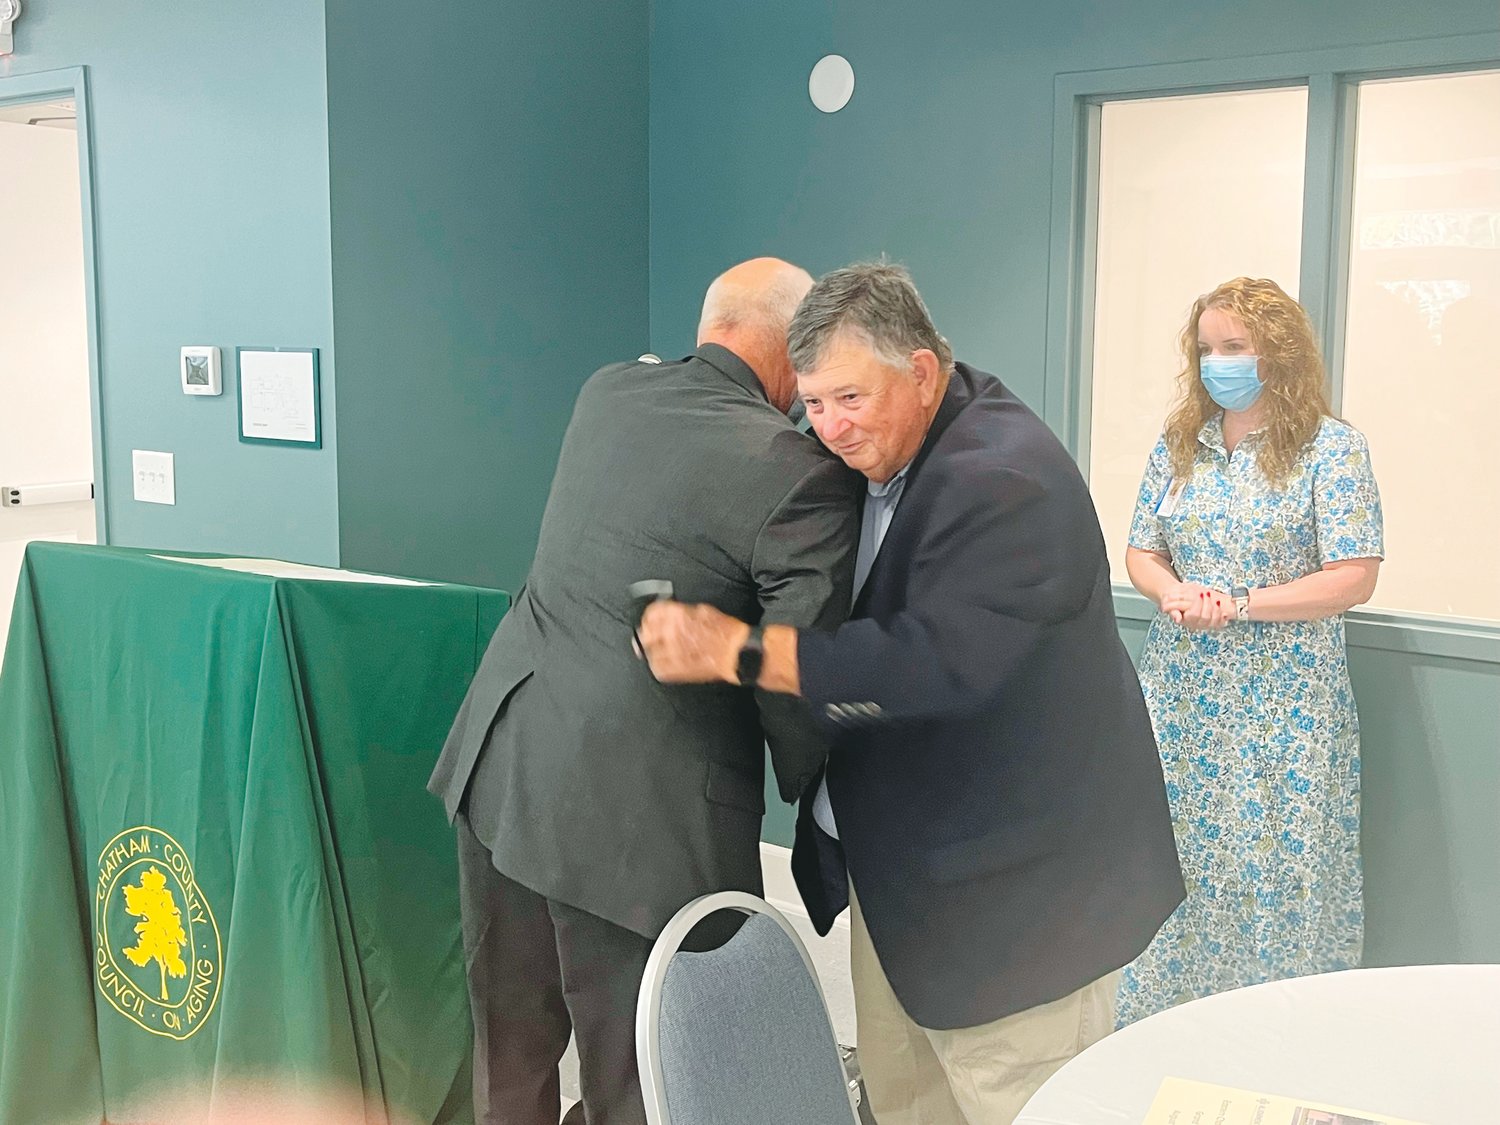 Johnny Shaw, president of the Chatham County Council on Aging board of directors, embraces retired Director Dennis Streets as current Director Ashlyn Martin looks on during the grand opening program of the renovated Eastern Chatham Senior Center last Friday in Pittsboro.